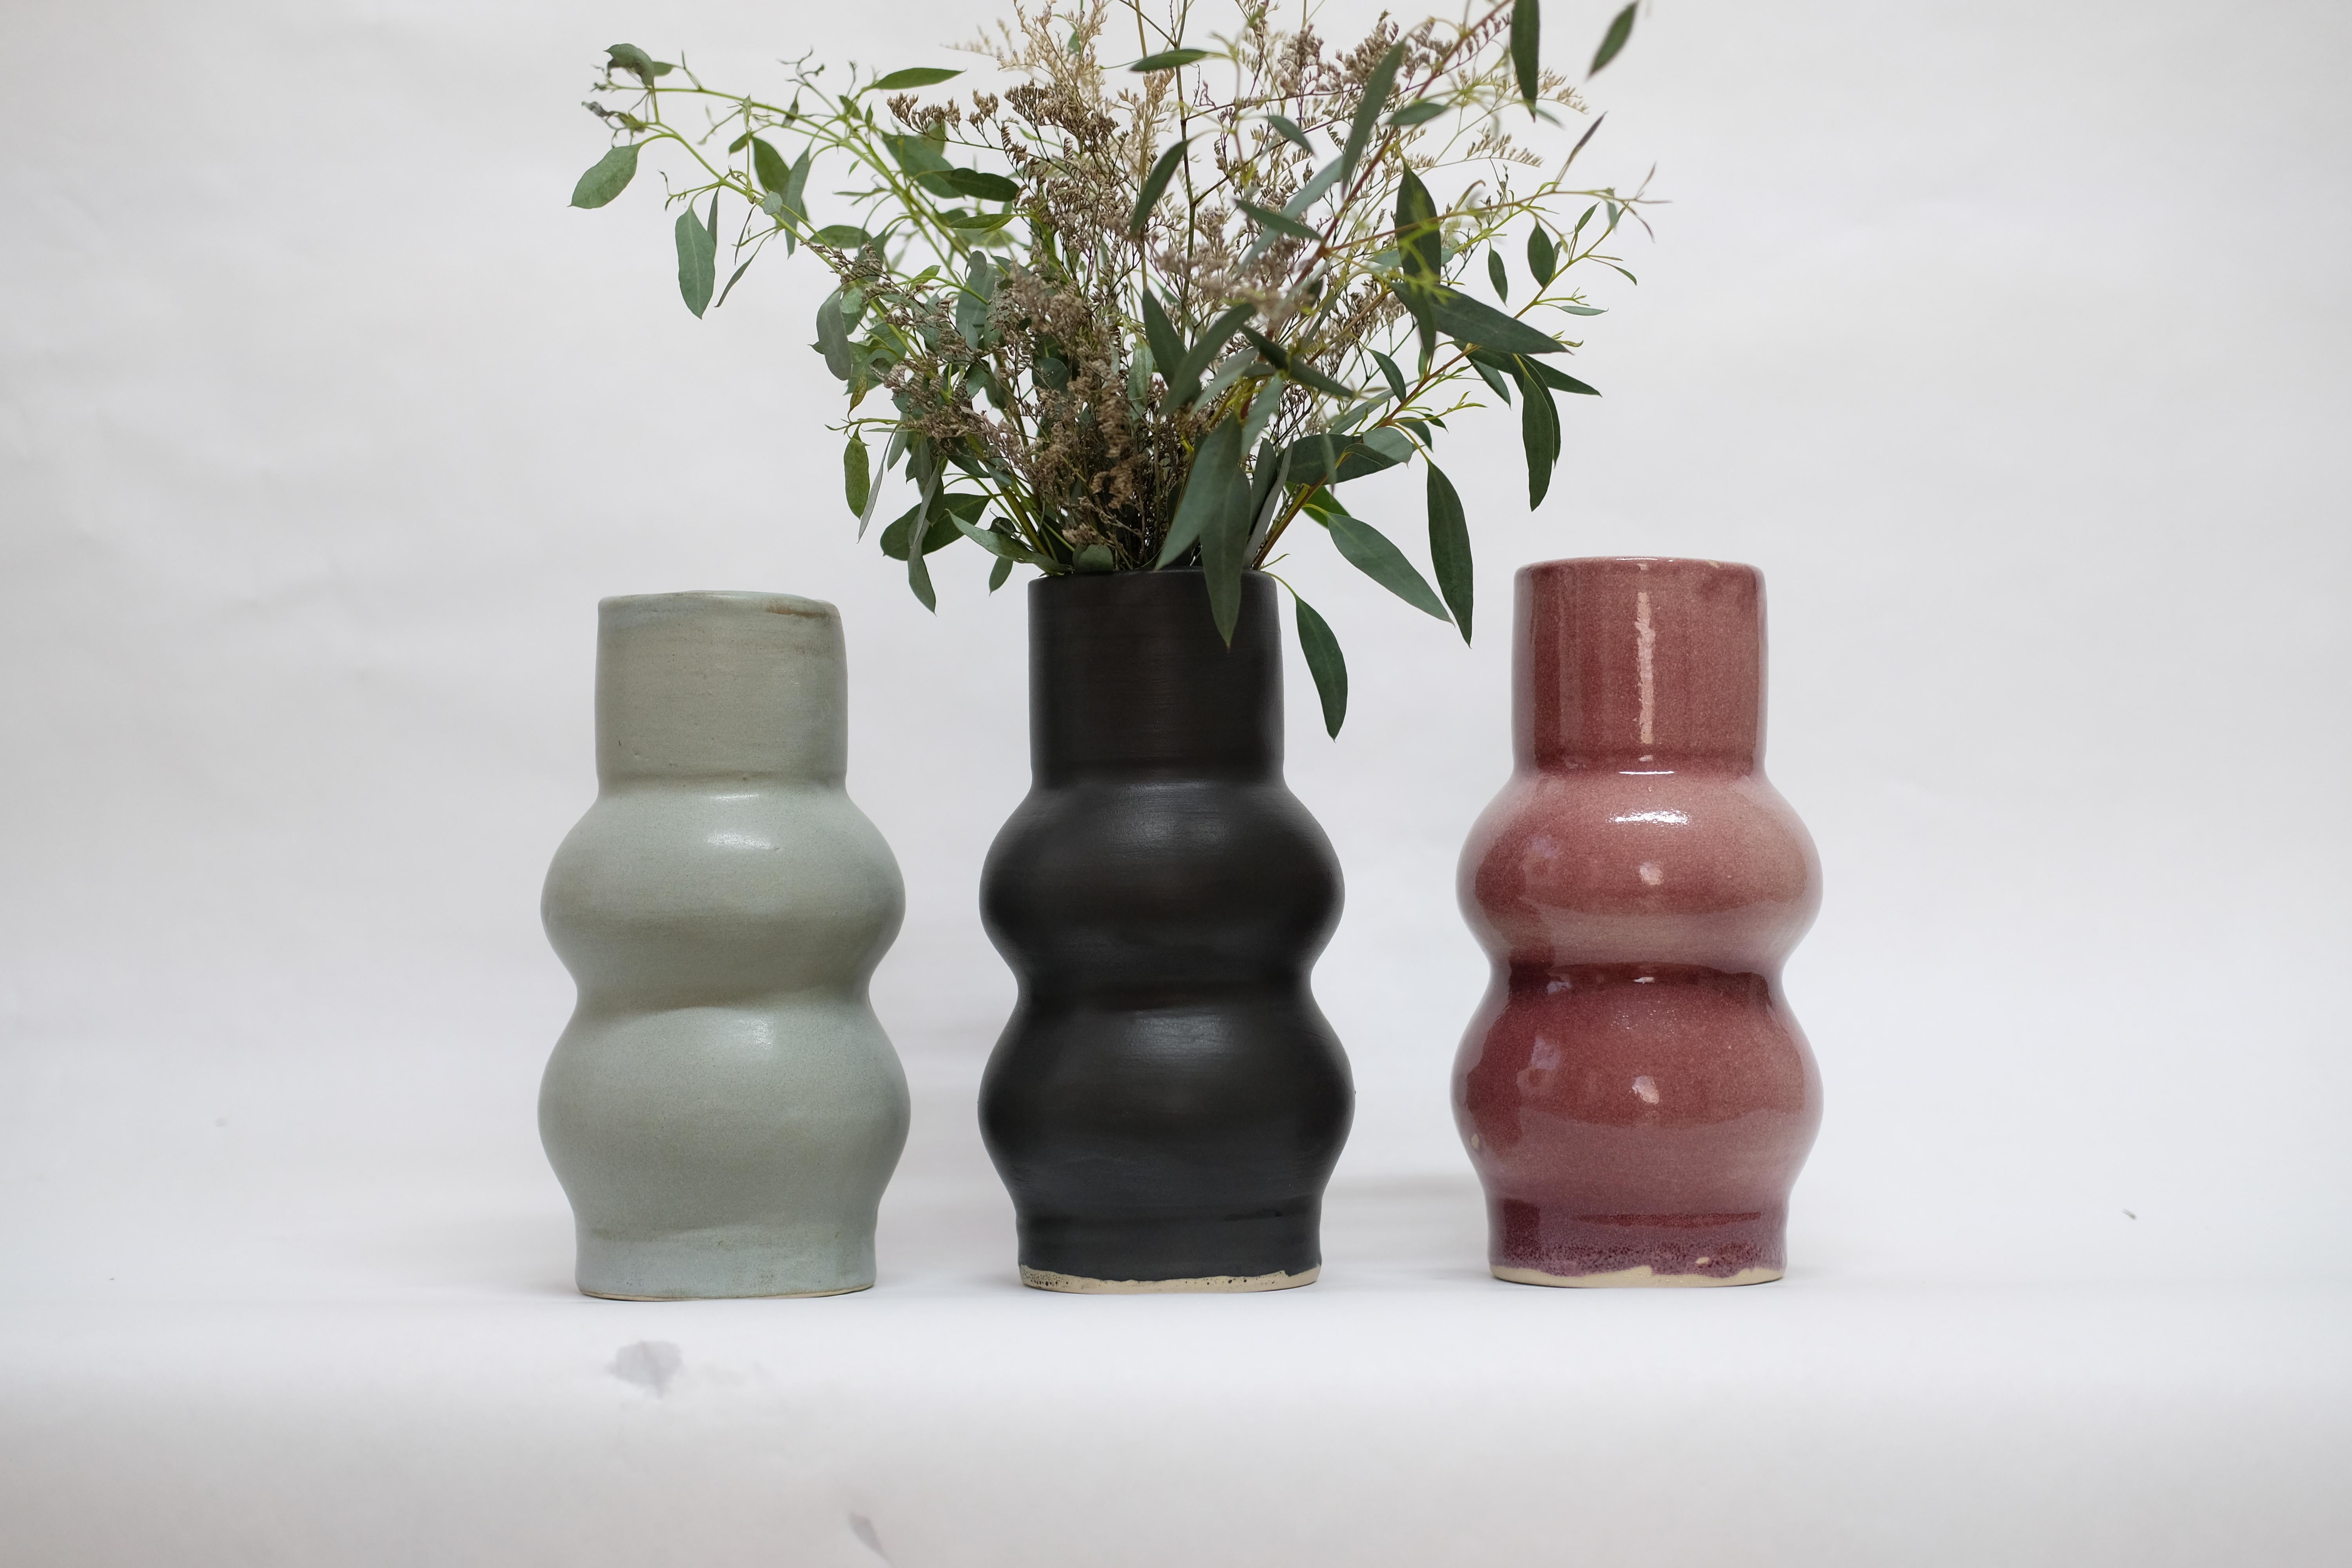 Set of 3 Femme II unique stoneware vase by Camila Apaez
Unique 
Materials: Stoneware
Dimensions: 8 x 8 x 22 cm

This year has been shaped by the topographies of our homes and the uncertainty of our time. We have found solace in the humbleness